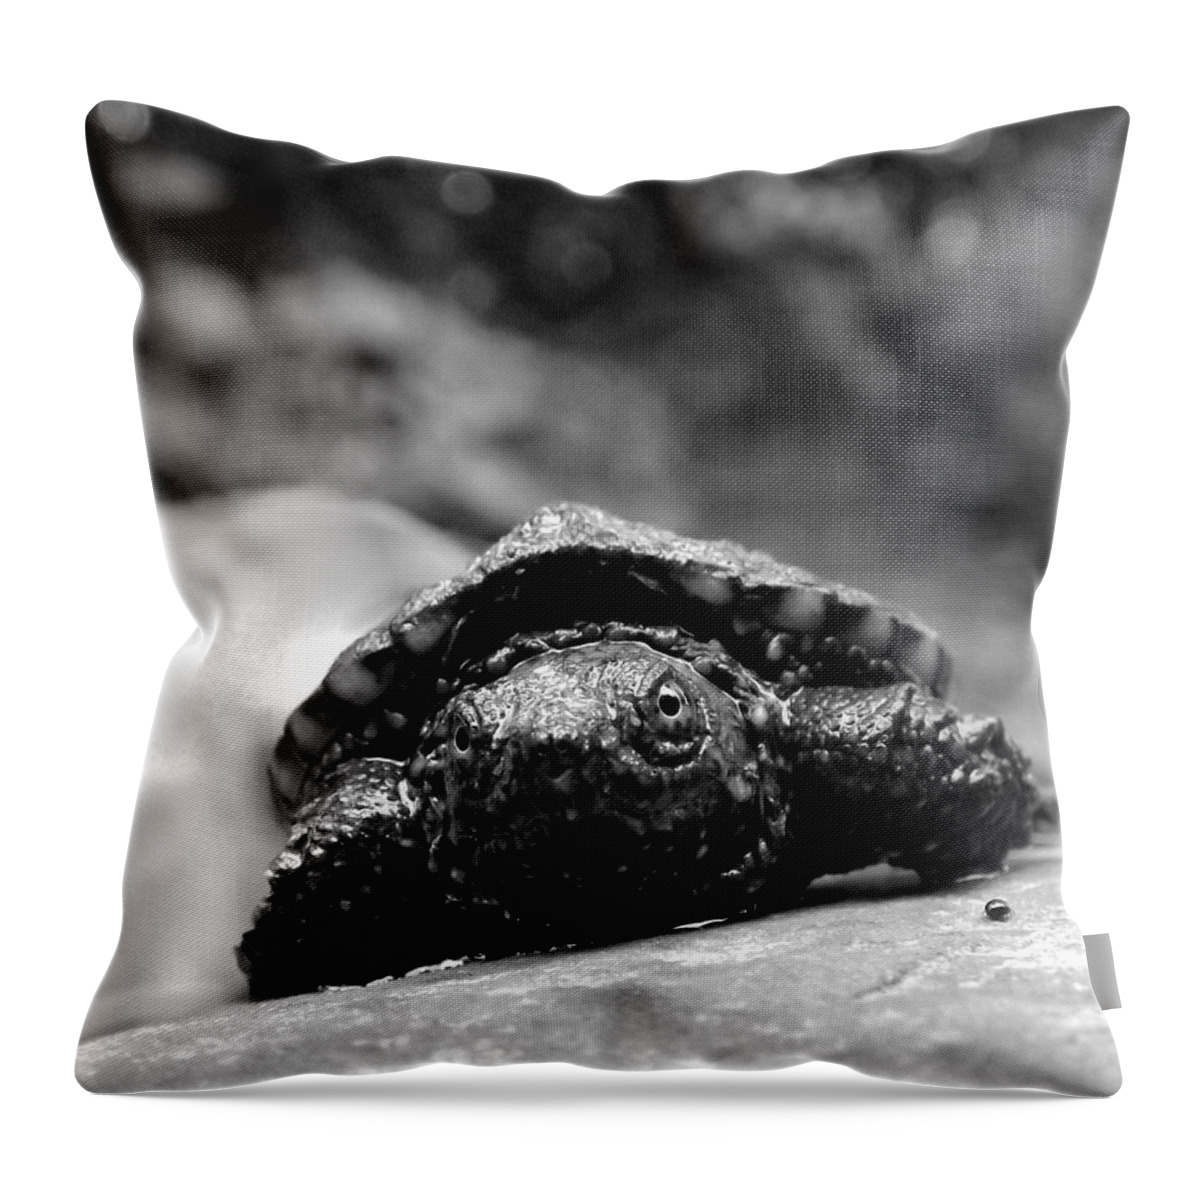 Snapping Throw Pillow featuring the photograph Lil Snapper by Danielle R T Haney